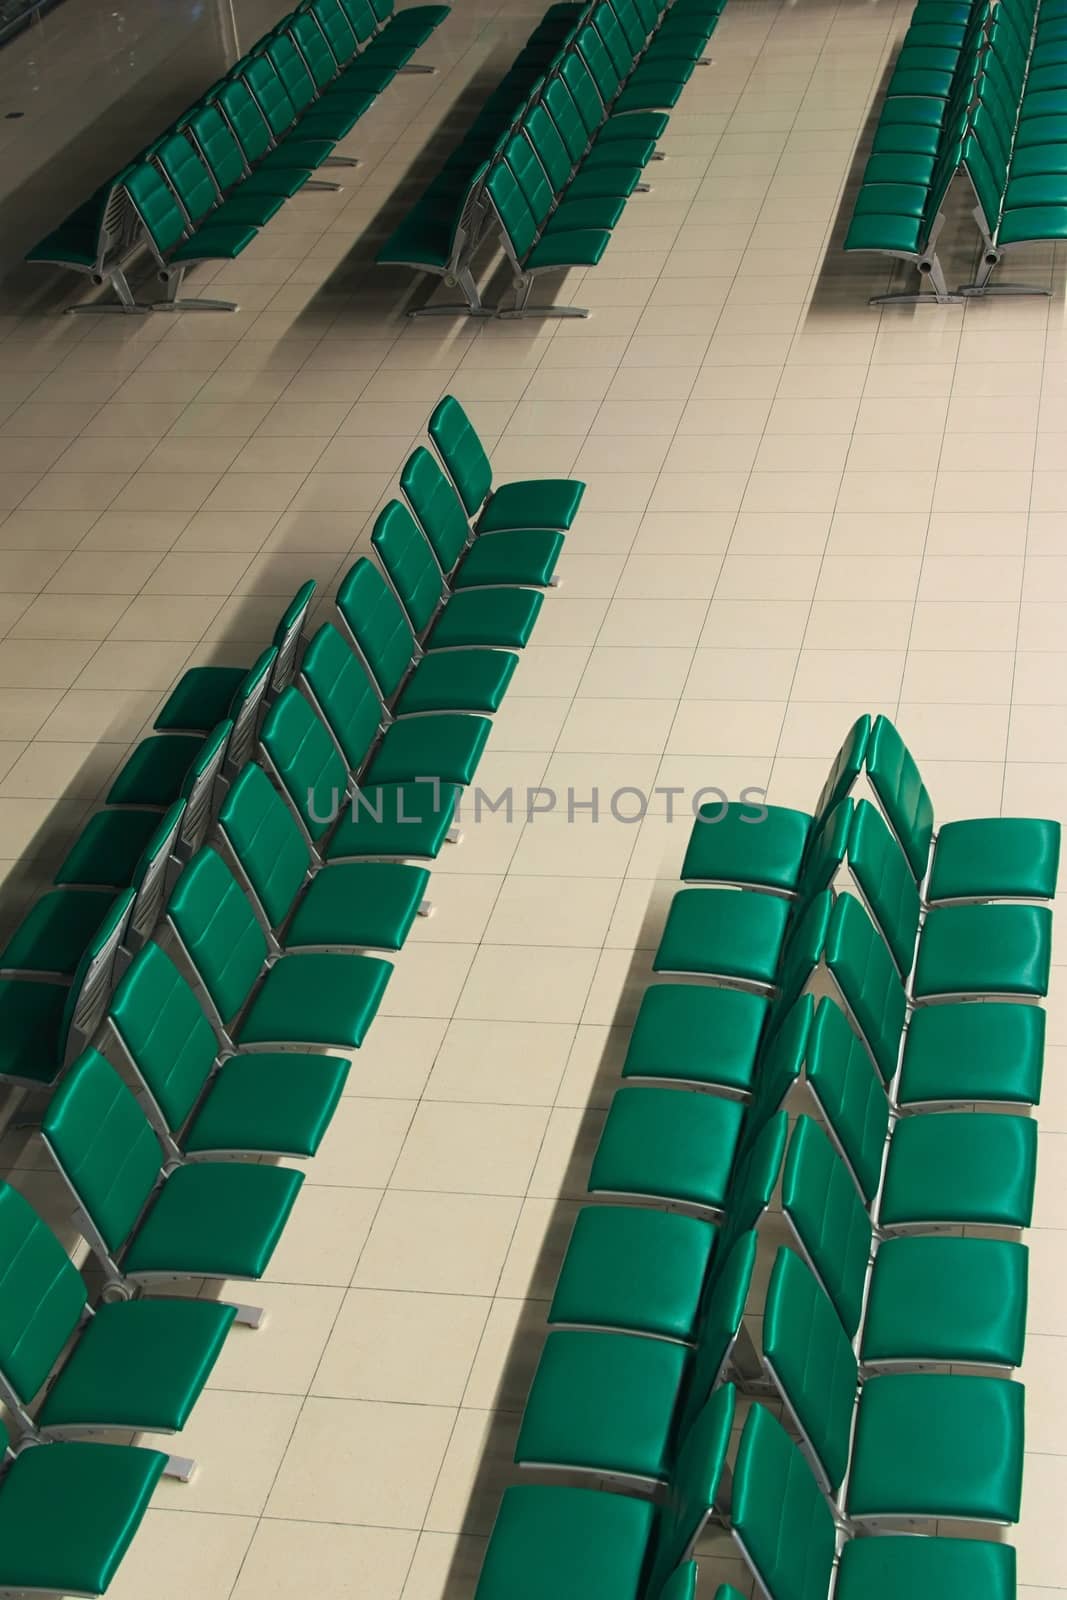 Green empty seats at an airport waiting area. High angle view. by hernan_hyper